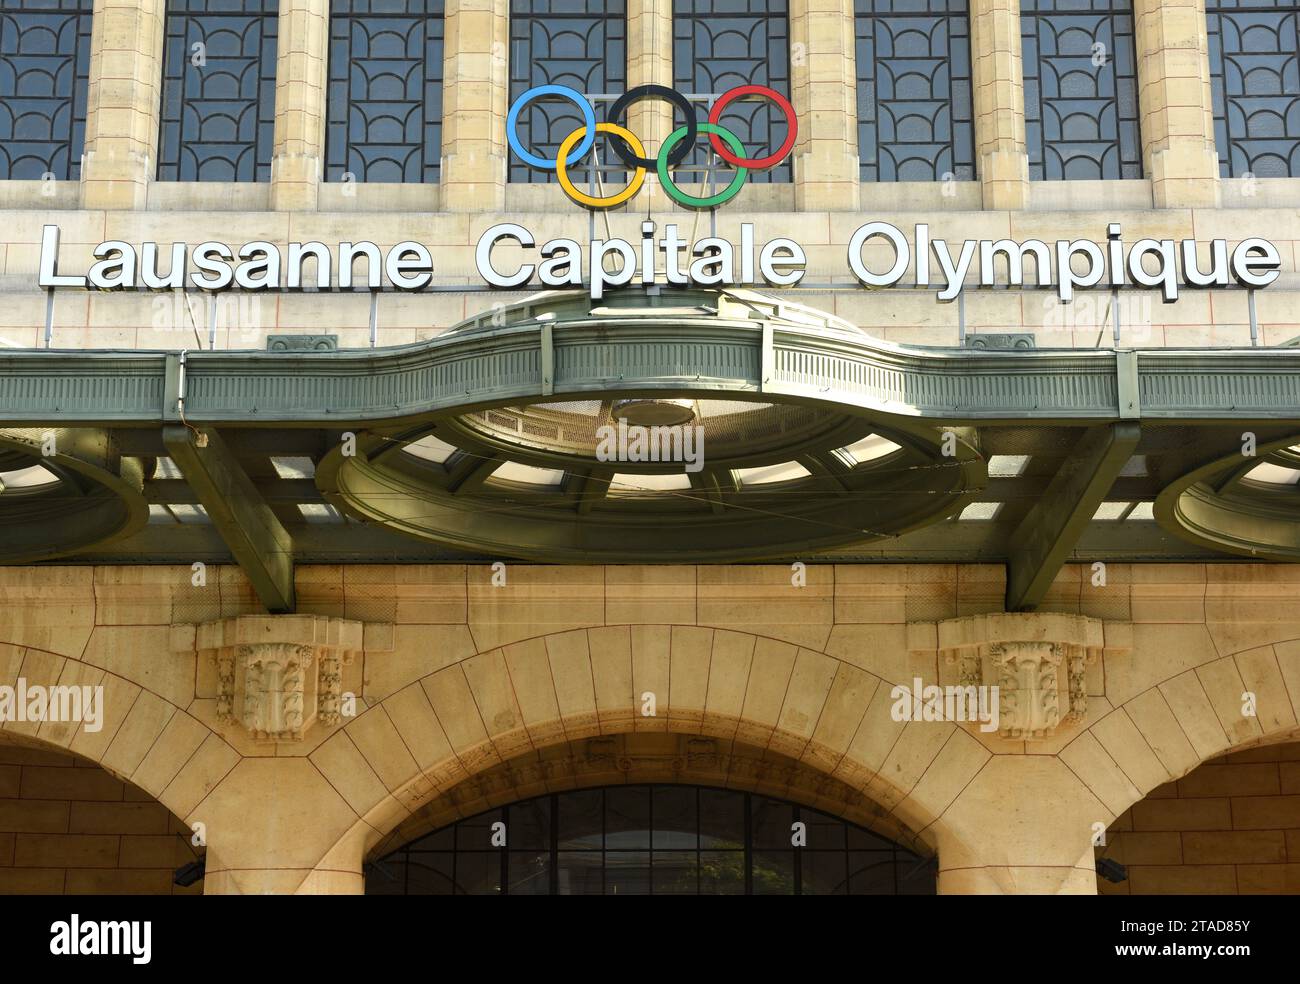 Lausanne, Switzerland -  June 03, 2017: Olympic rings and words 'Lausanne Capitale Olympique' at the main railway station building in Lausanne. Stock Photo